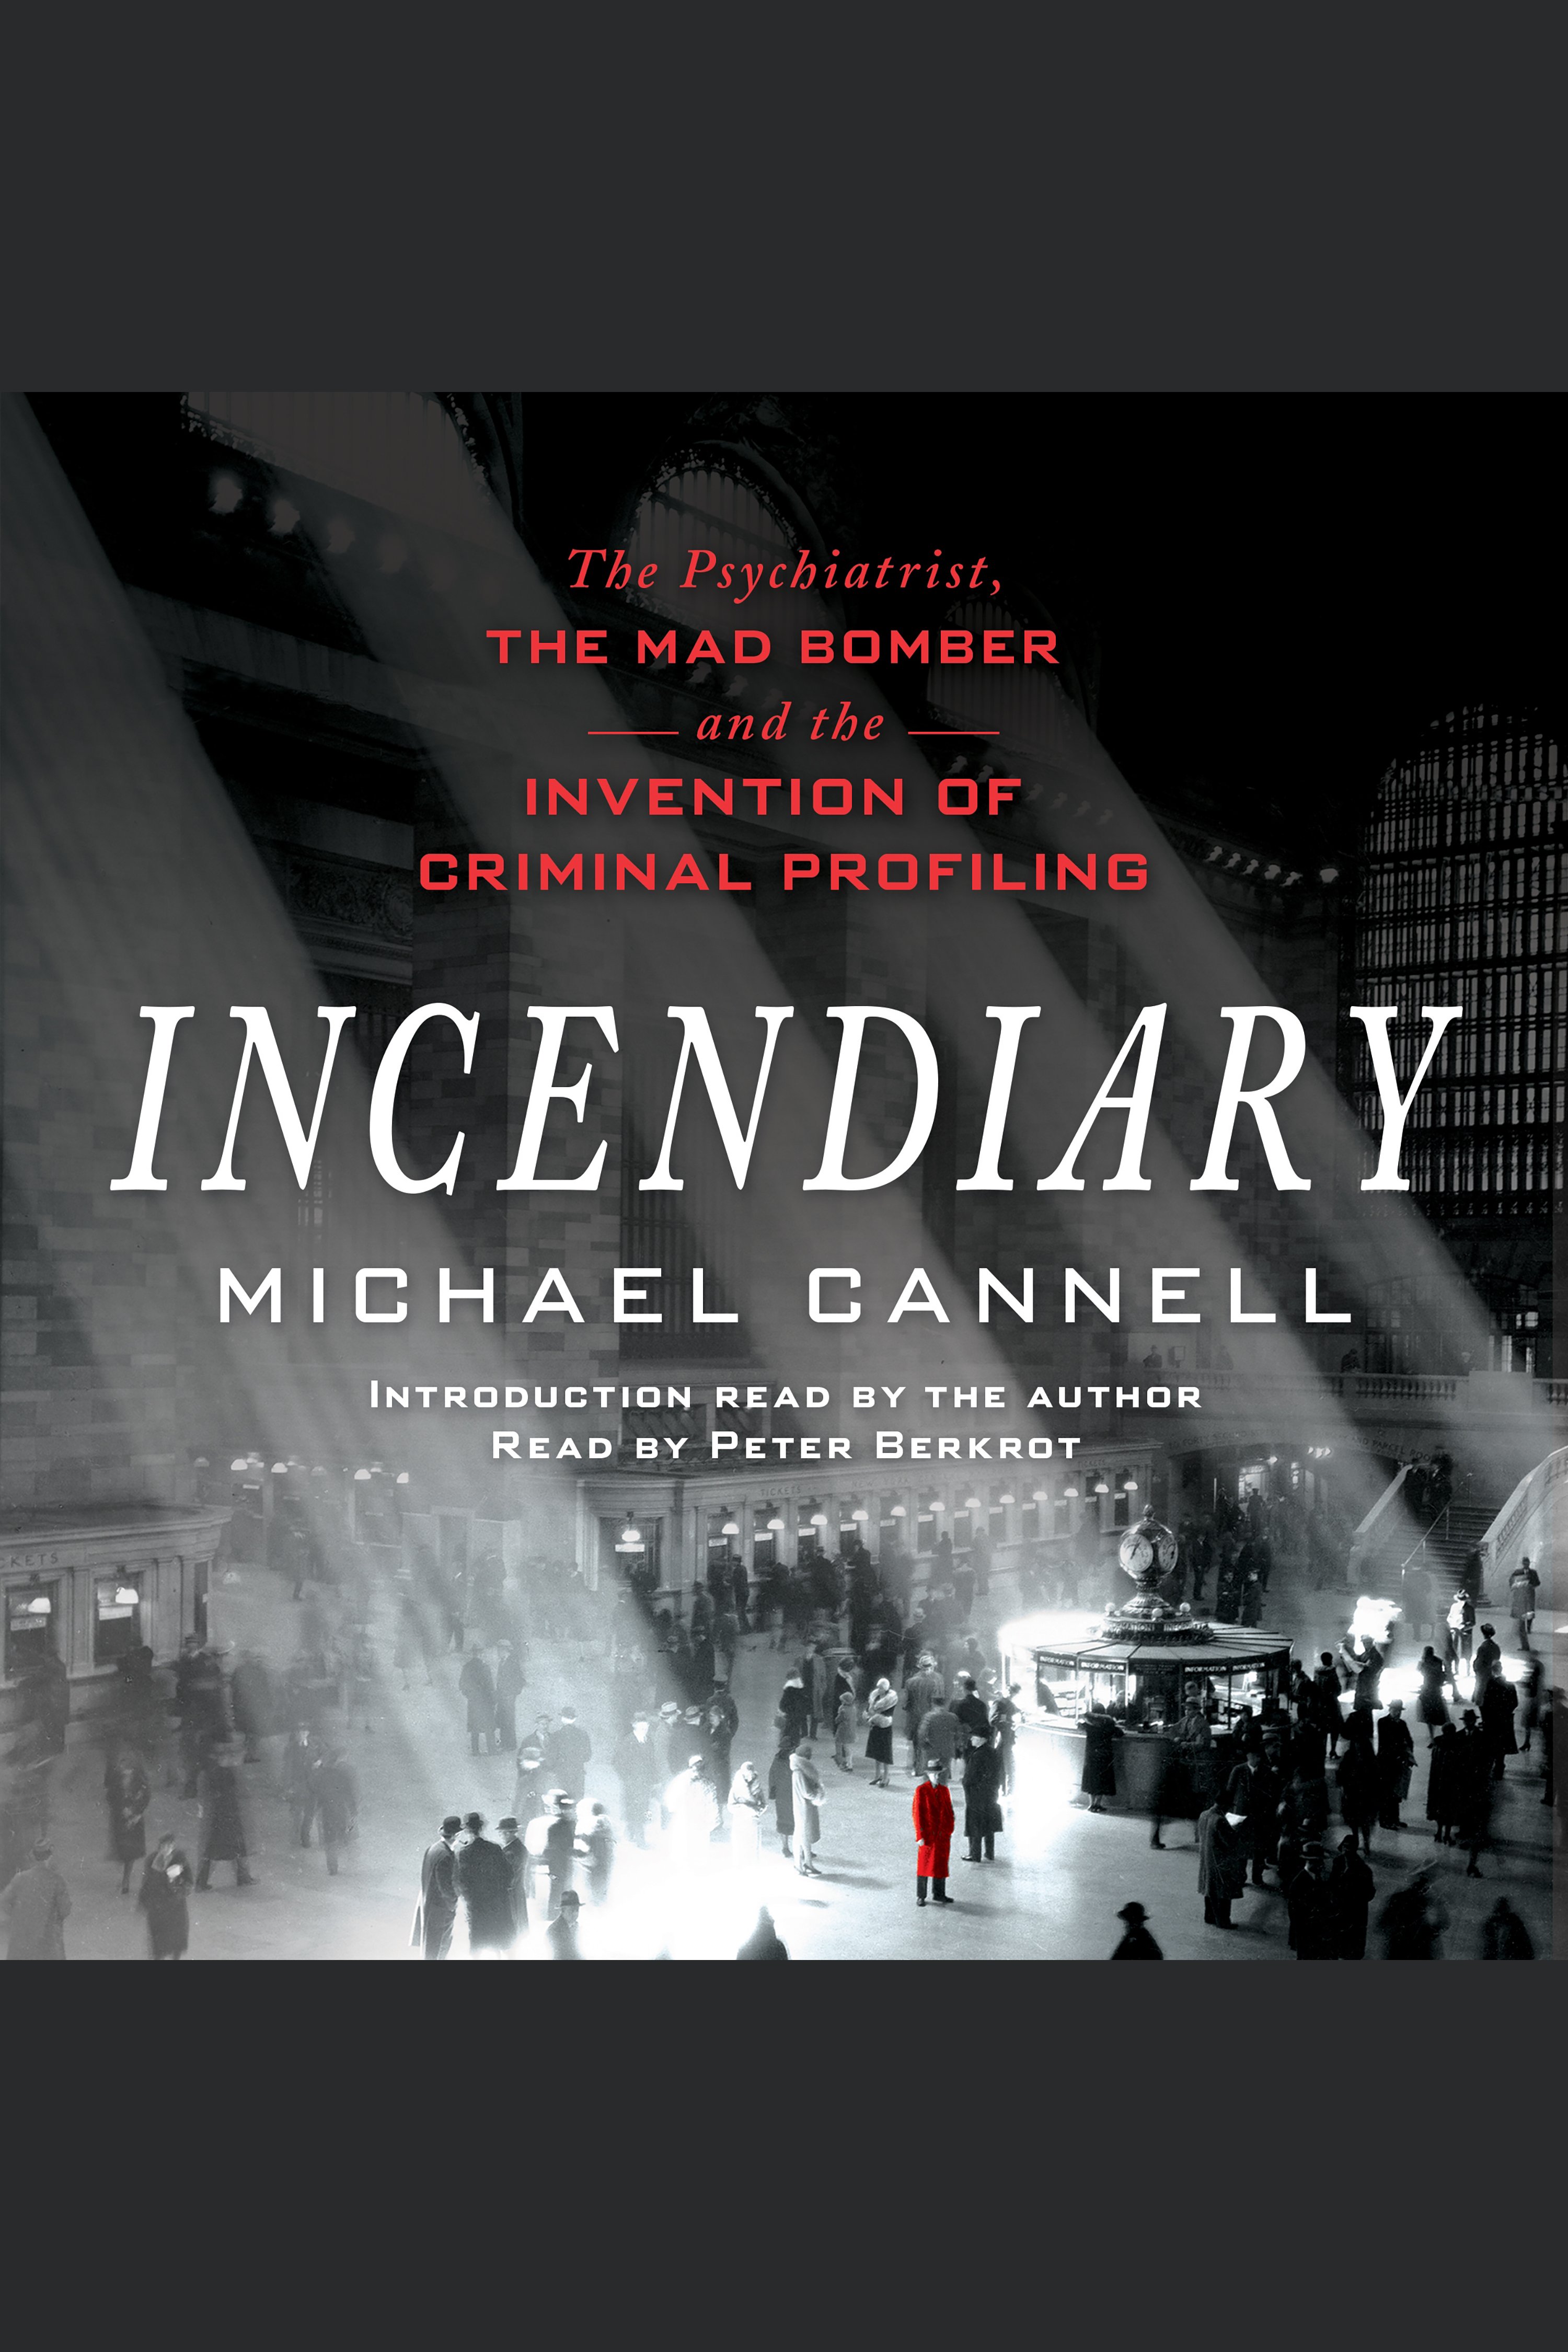 Image de couverture de Incendiary [electronic resource] : The Psychiatrist, the Mad Bomber, and the Invention of Criminal Profiling